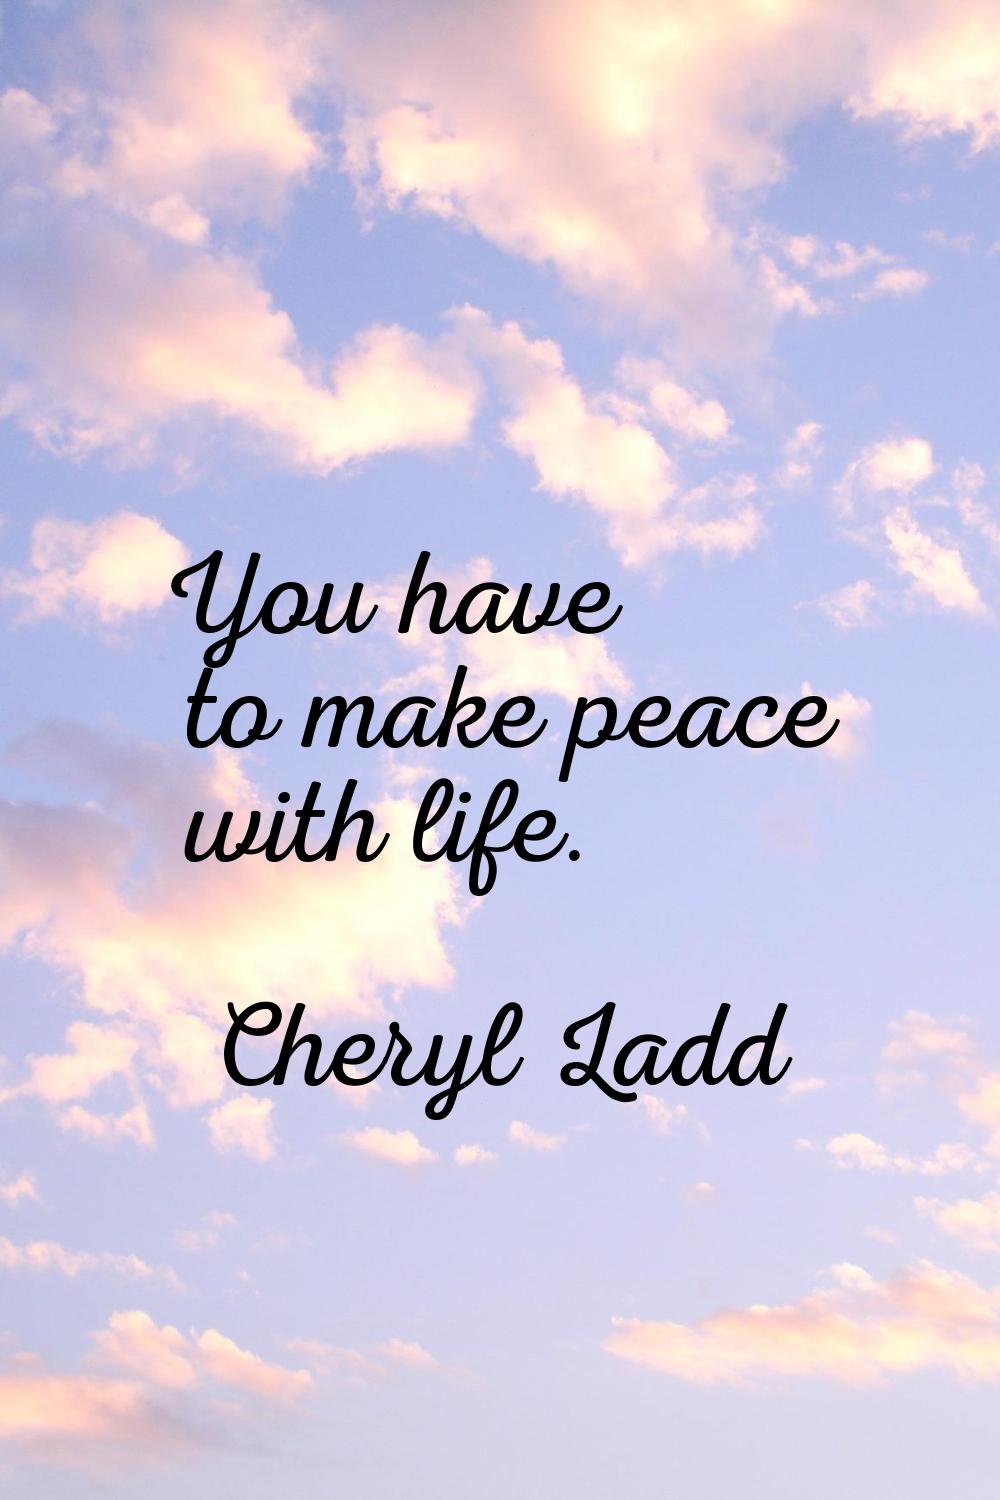 You have to make peace with life.